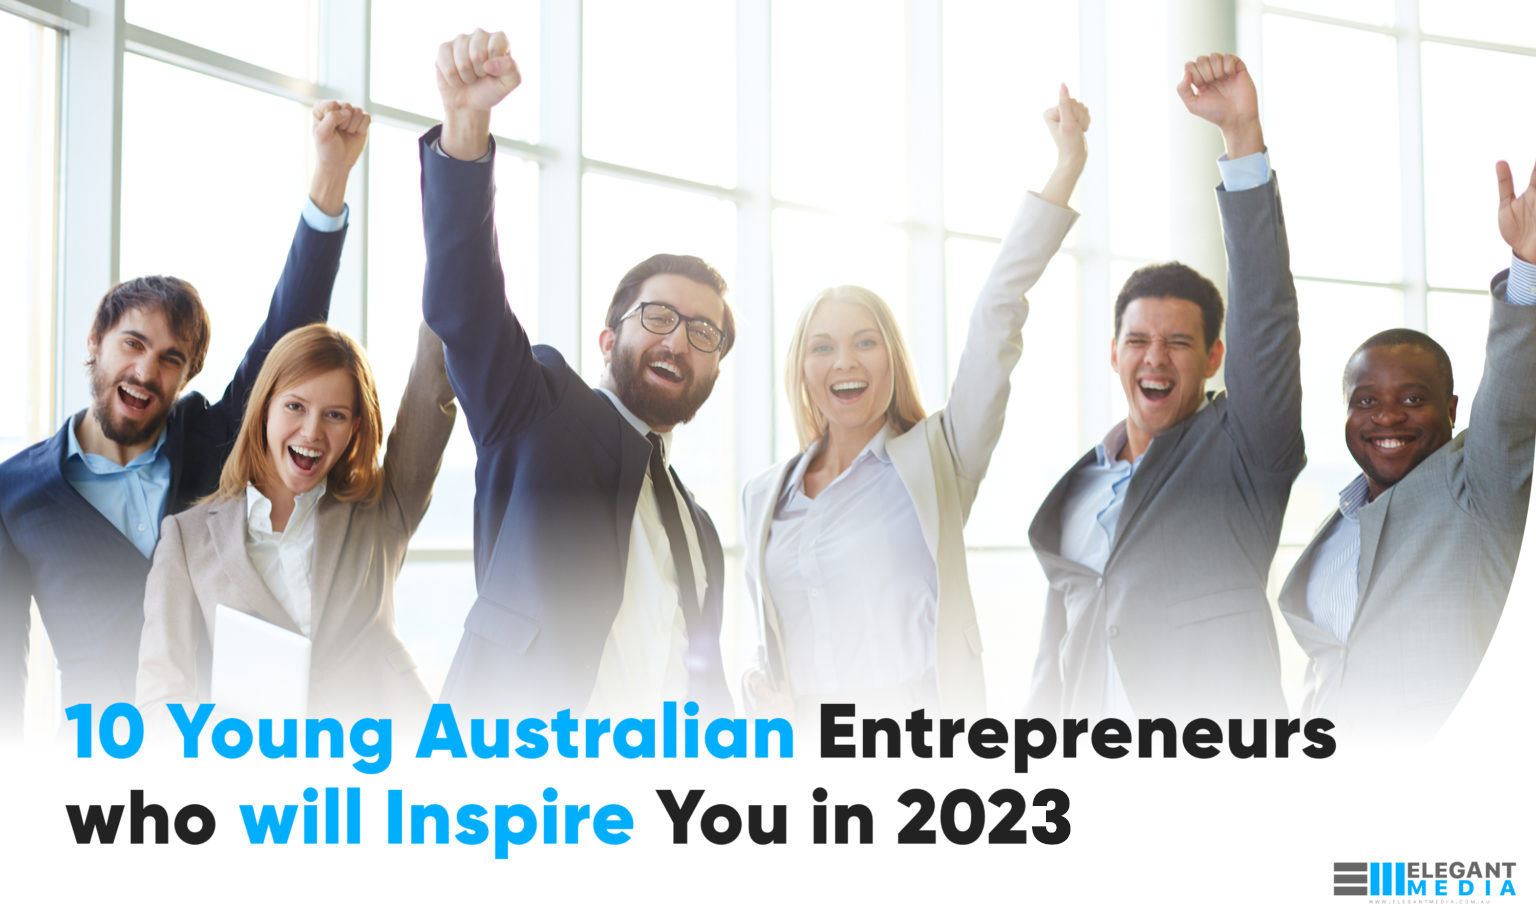 10 Young Australian Entrepreneurs who will Inspire You